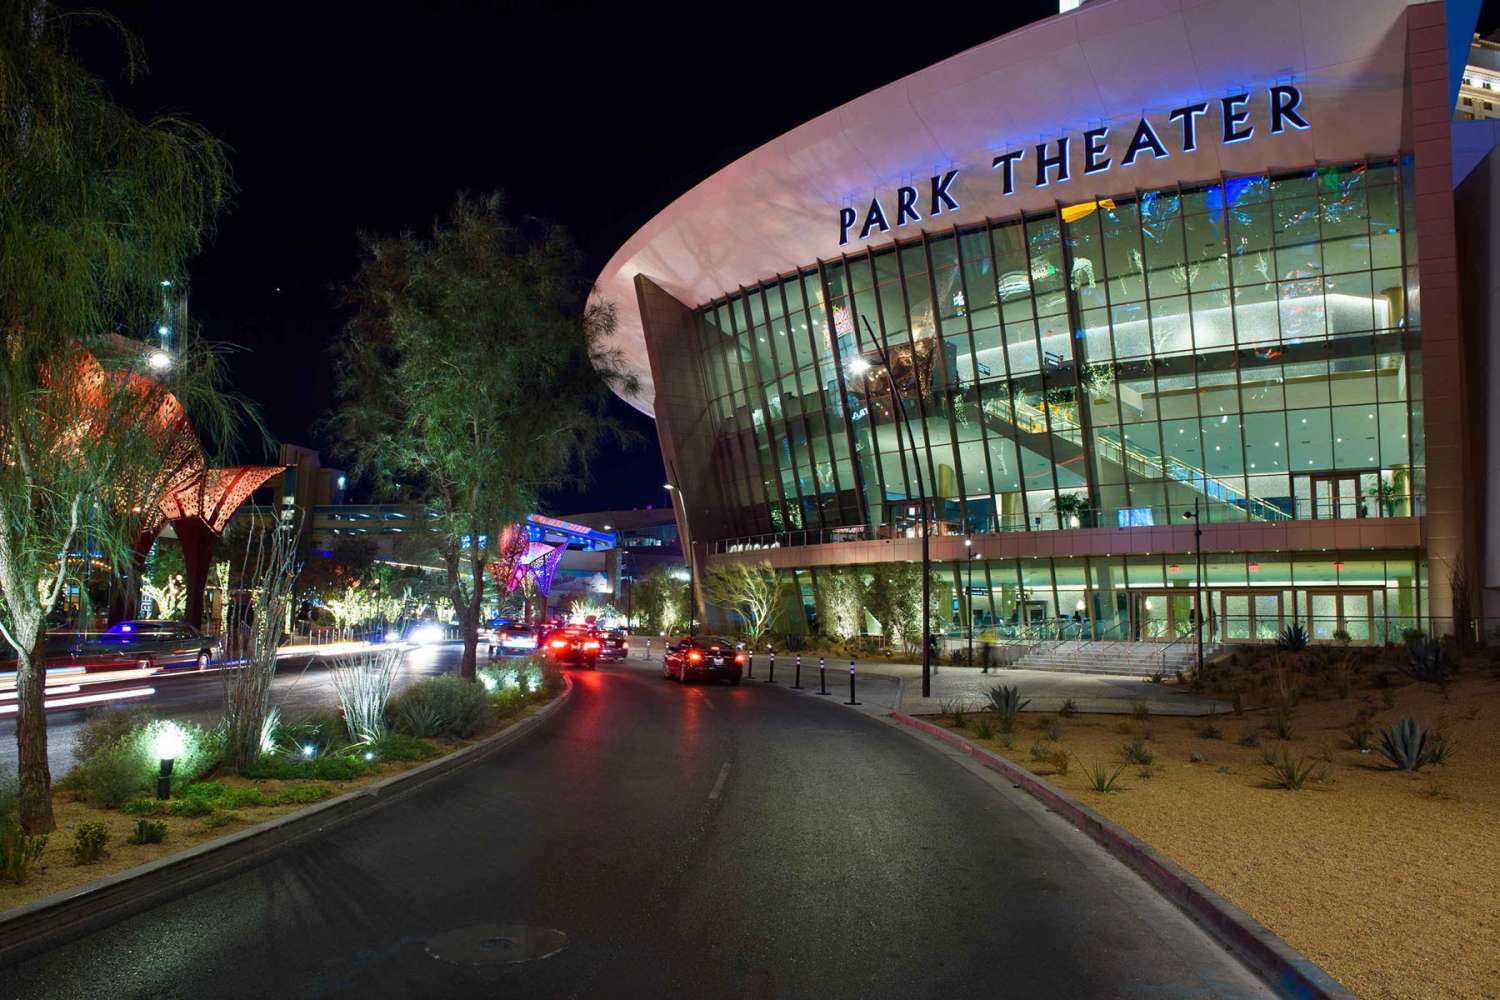 The new Park Theater has already scheduled “extended engagements” with top artists including Bruno Mars, Cher and Ricky Martin